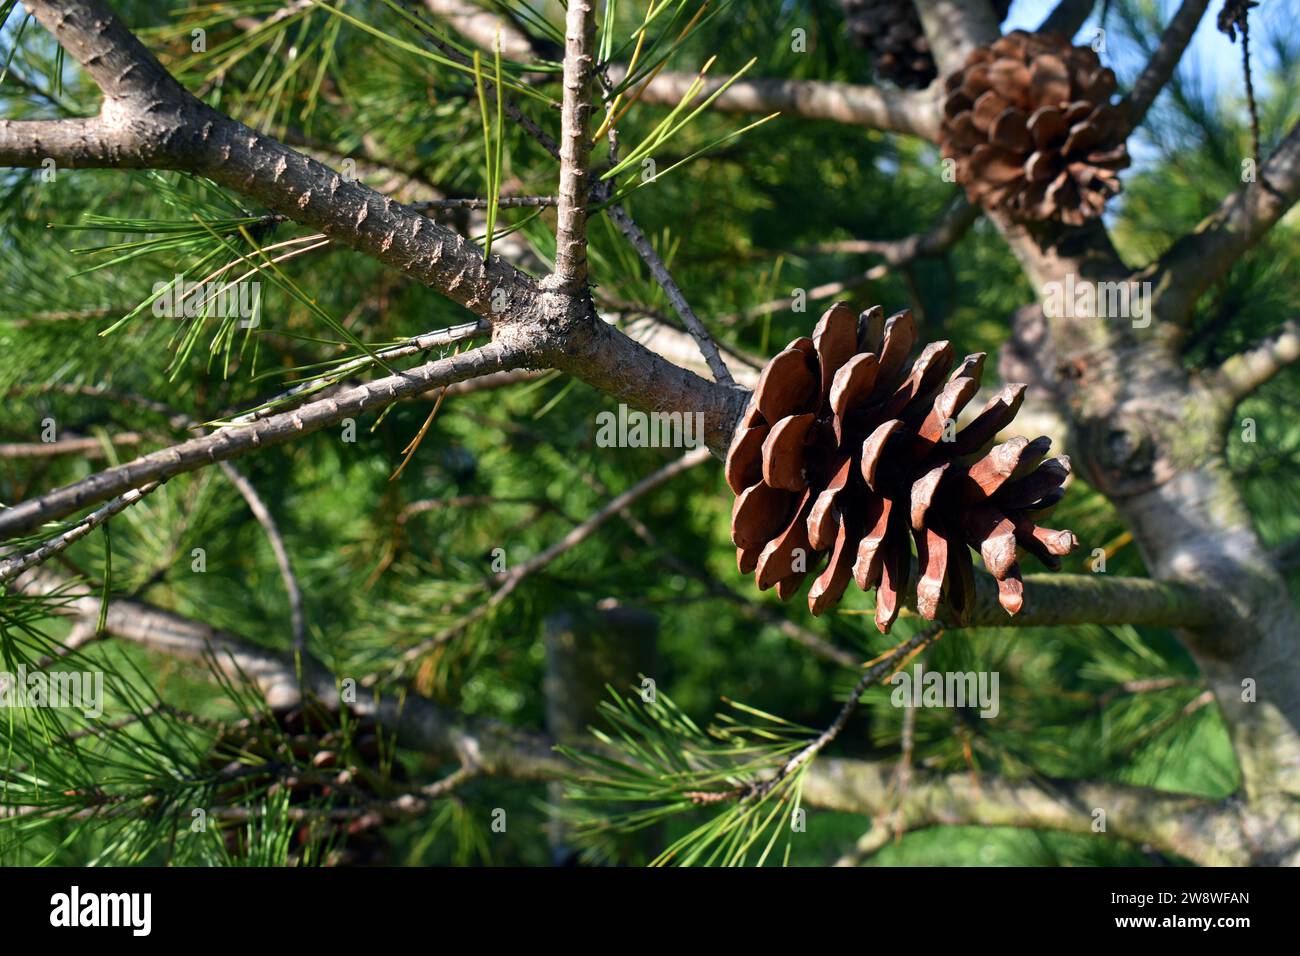 Leaves and cones of Macedonian pine (Pinus peuce) Stock Photo